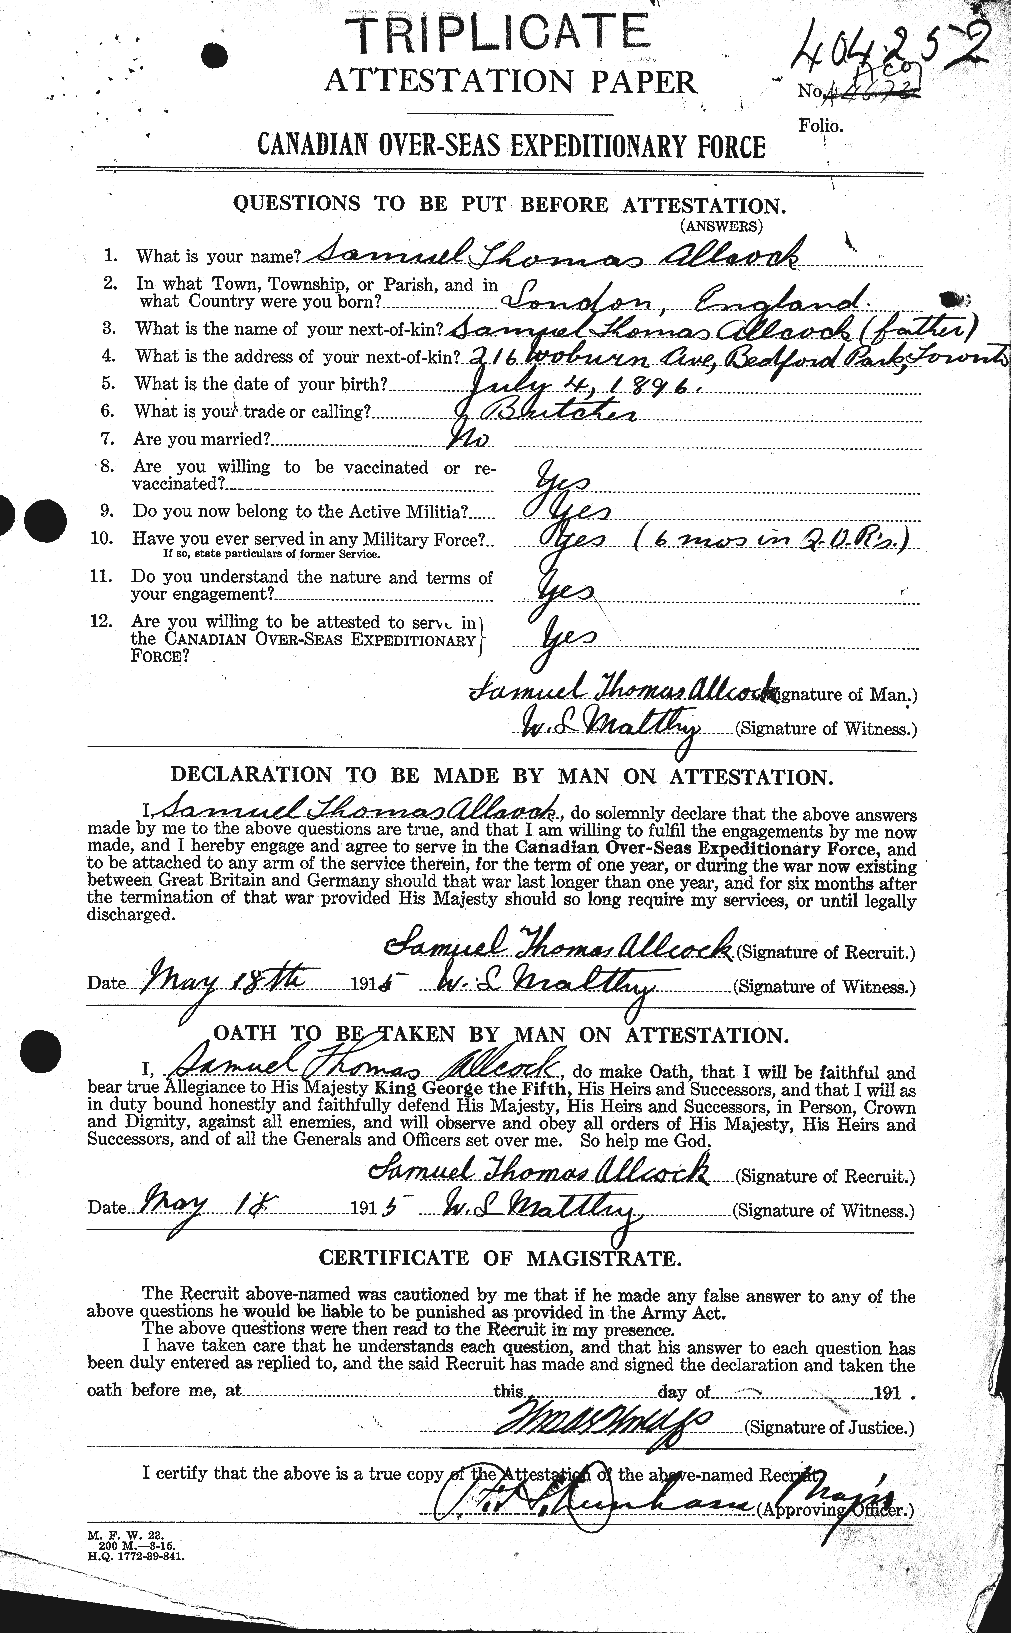 Personnel Records of the First World War - CEF 205695a